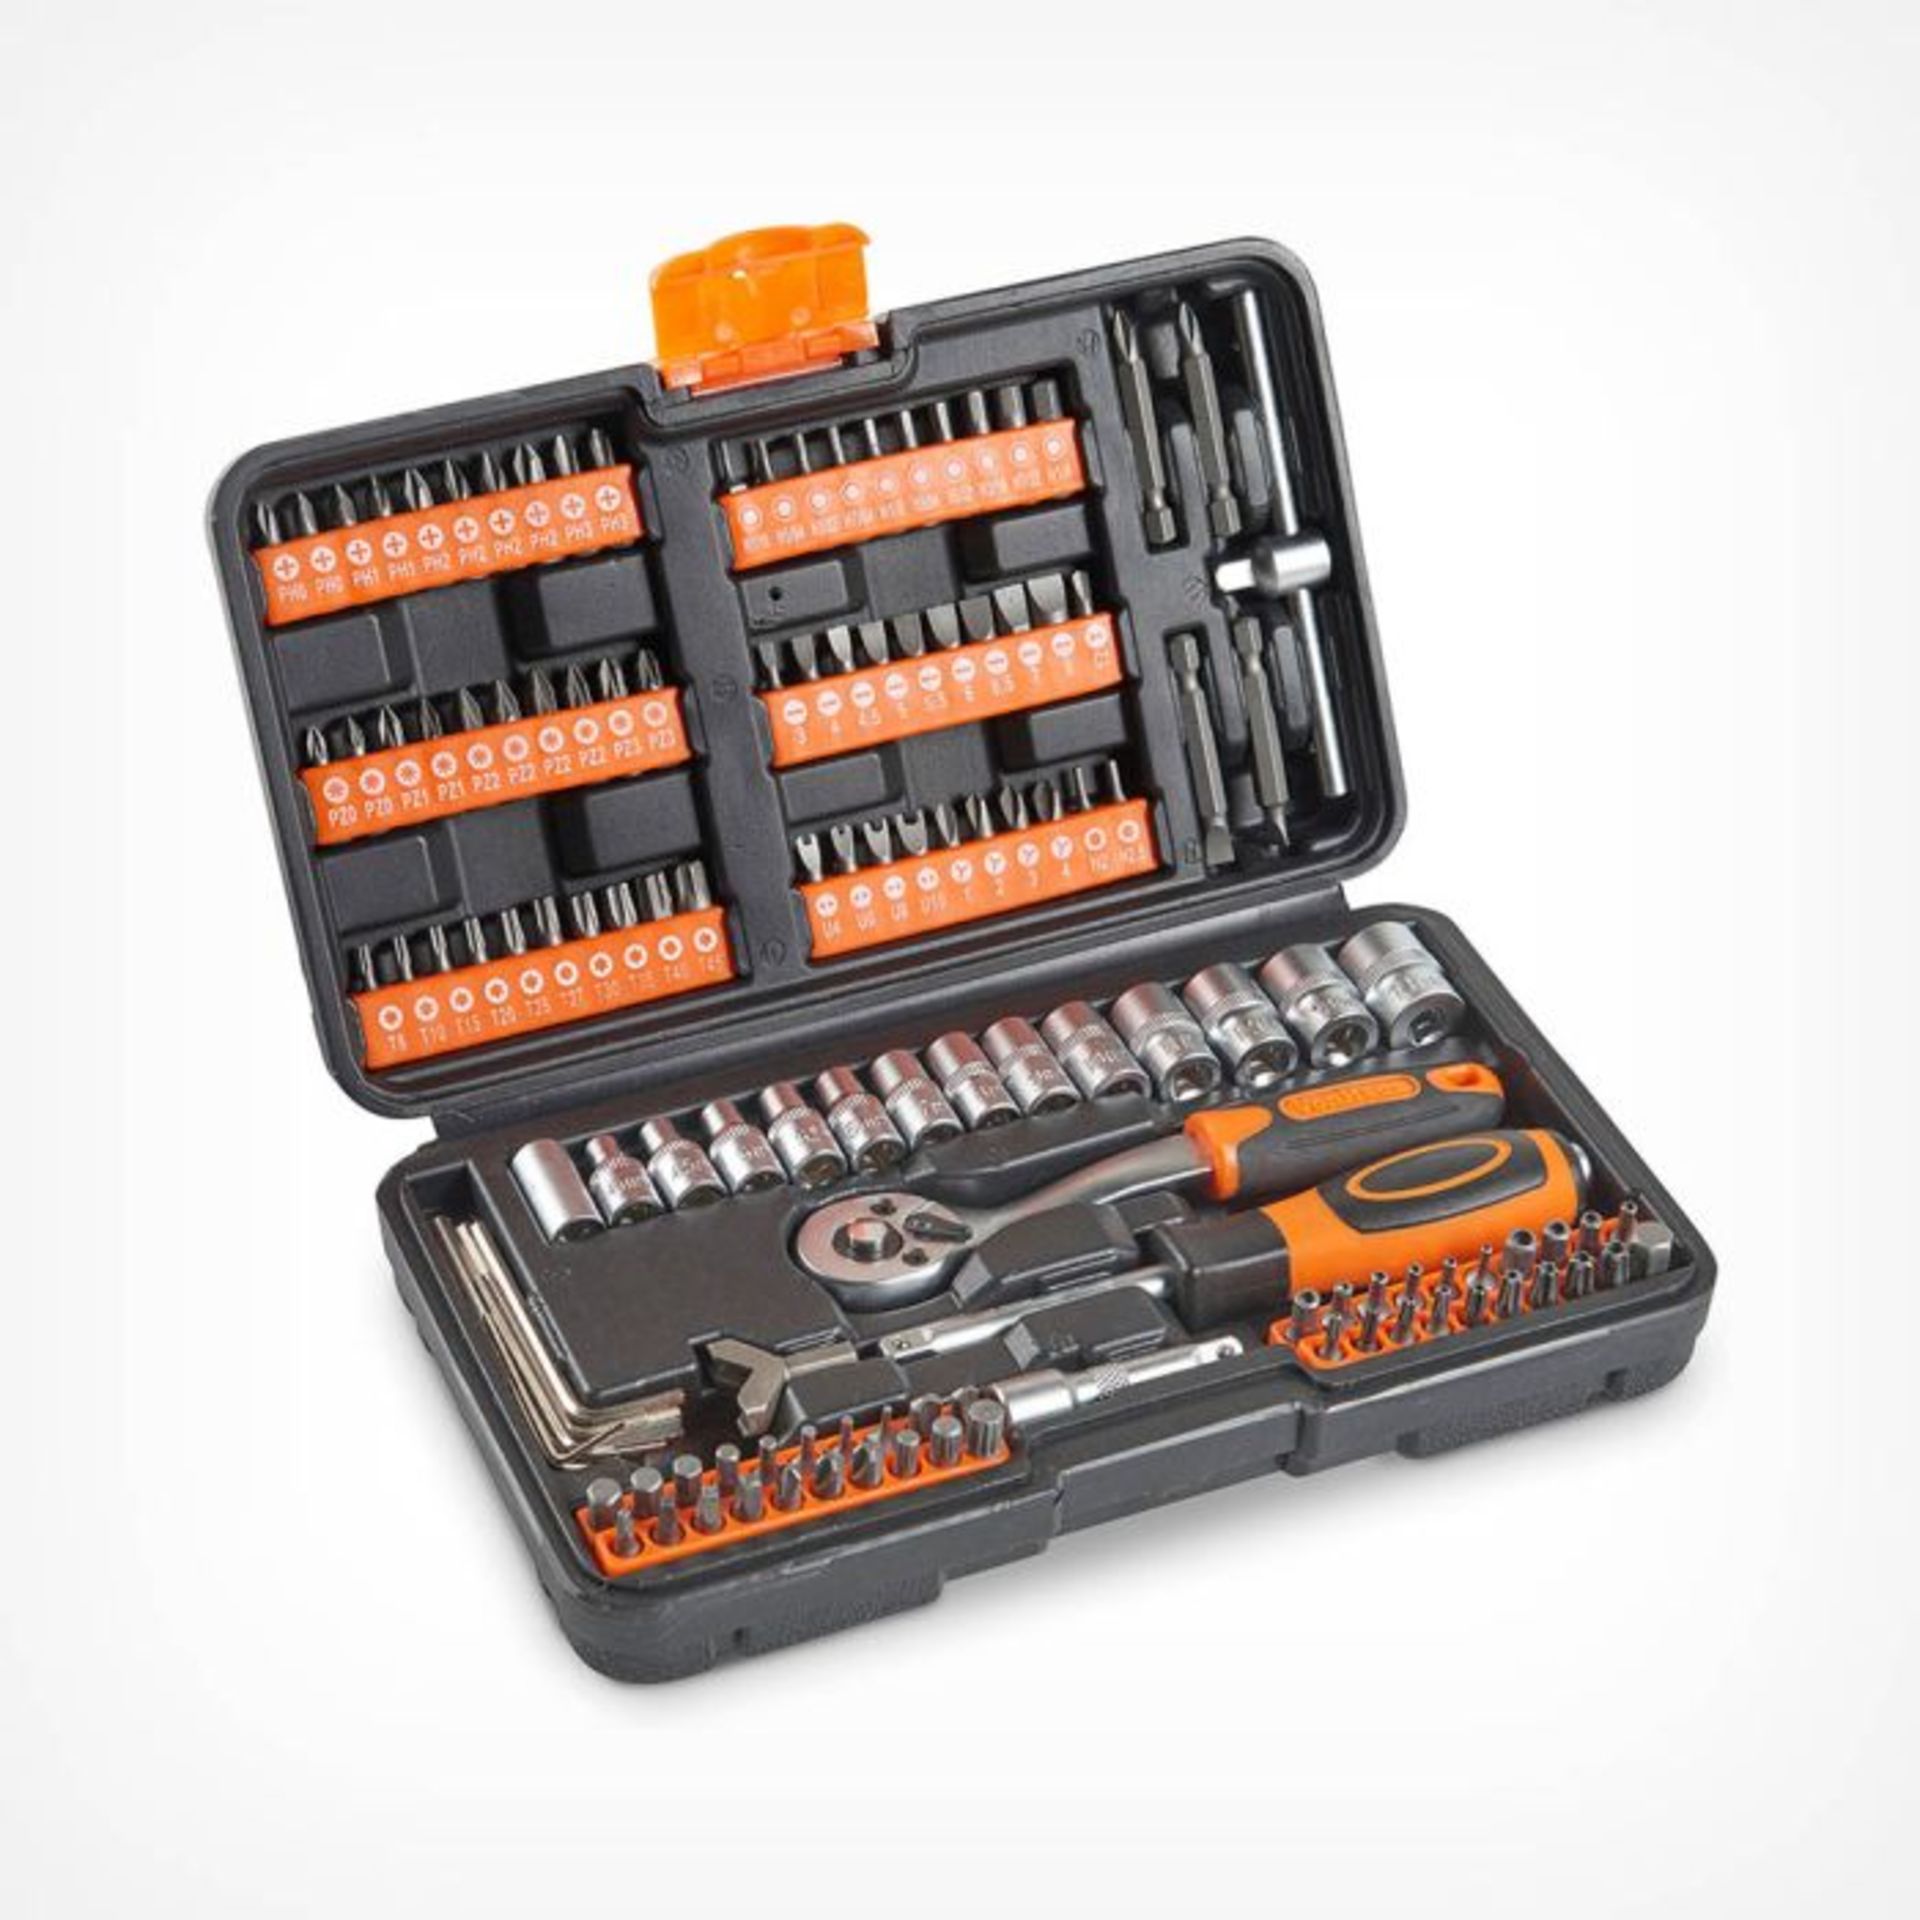 130pc Socket + Bit Set. - PW. Made from hardwearing chrome vanadium, with over a hundred screwdriver